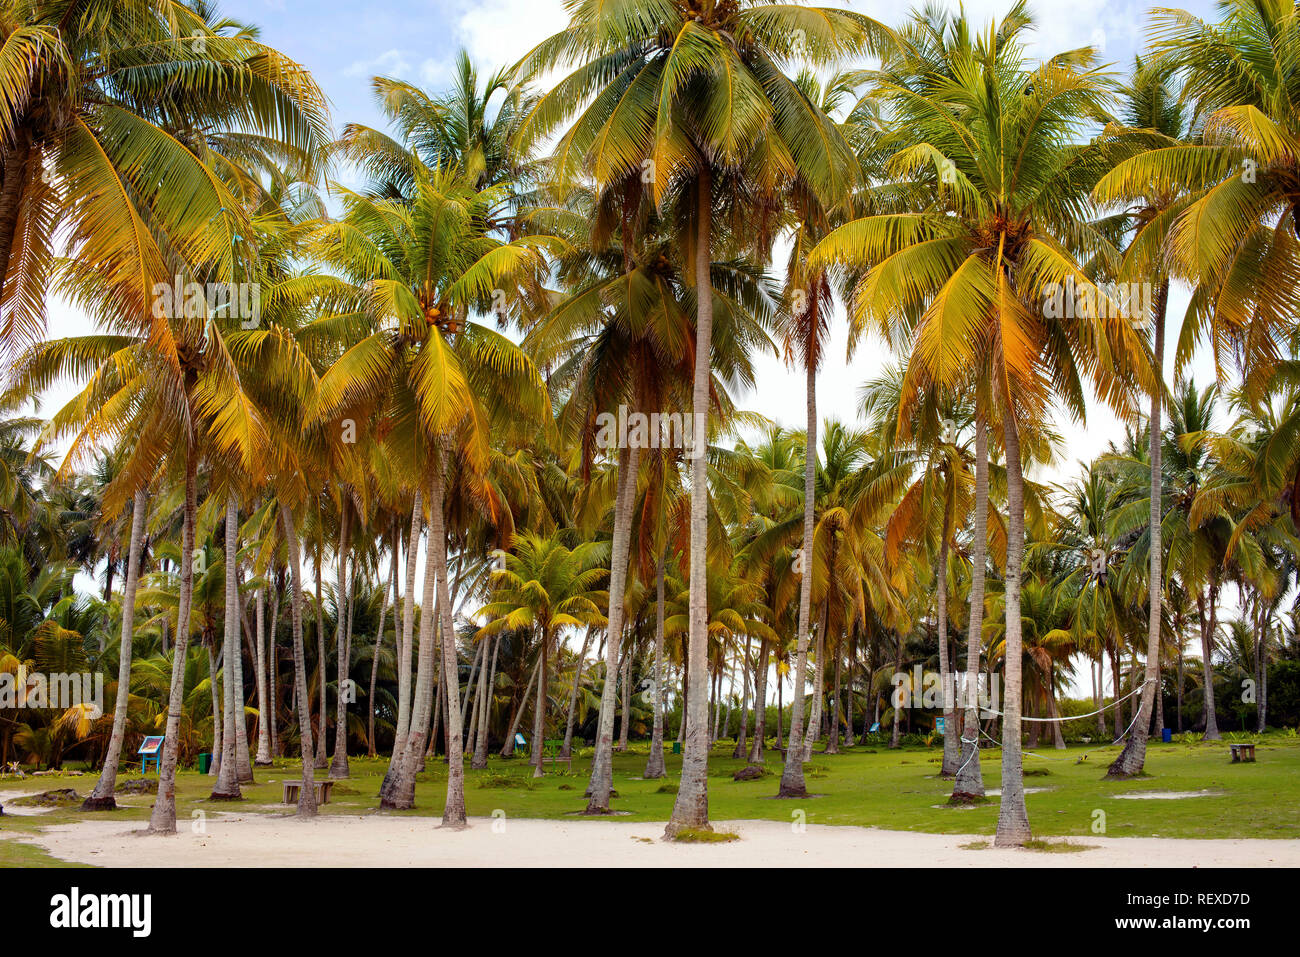 Palm trees on the small islet of Johnny Cay. San Andrés island, Colombia. Oct 2018 Stock Photo